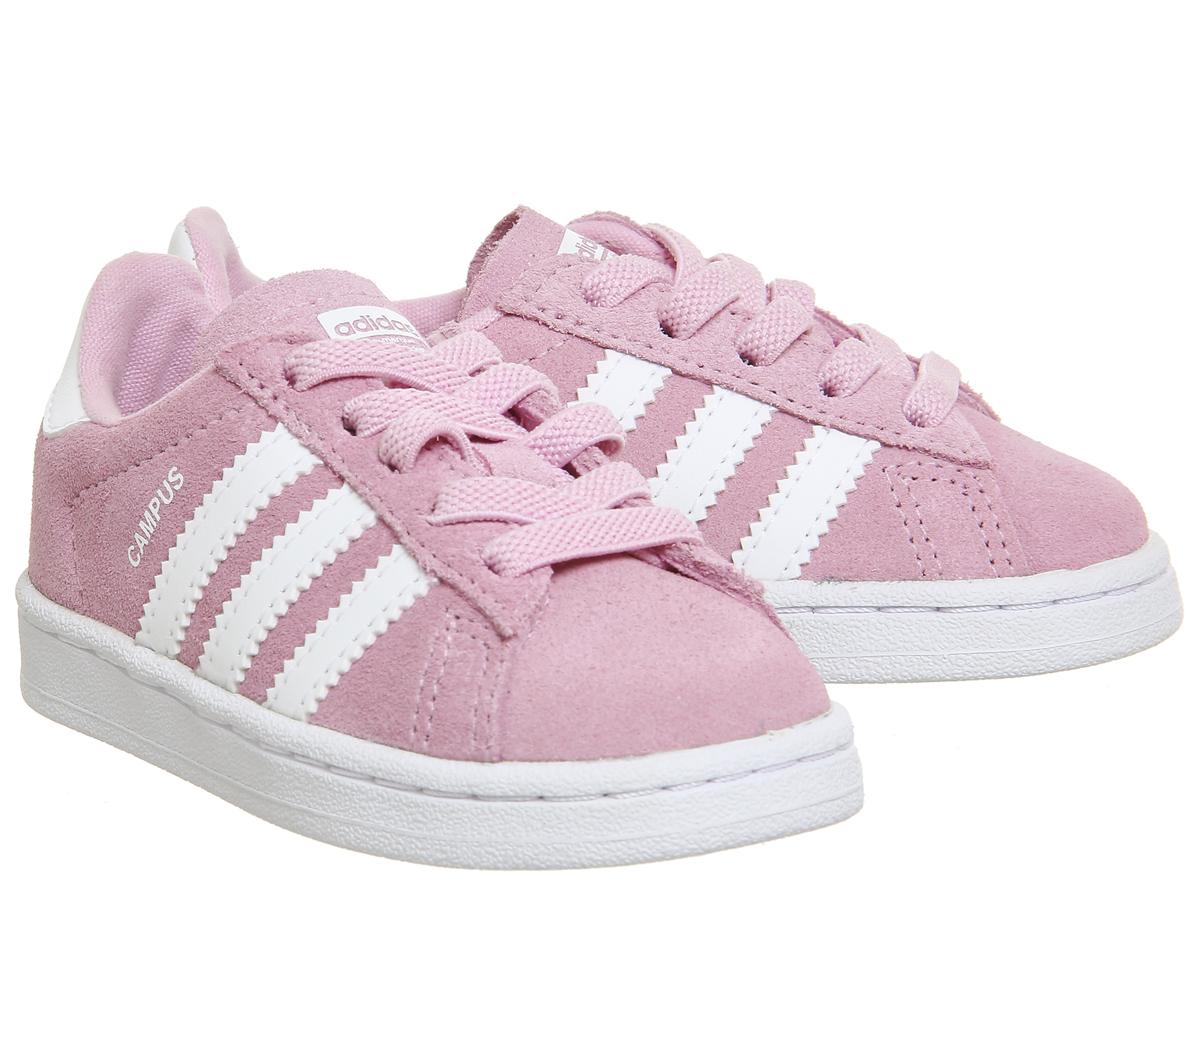 adidas Campus Infant Frost Pink White - Unisex